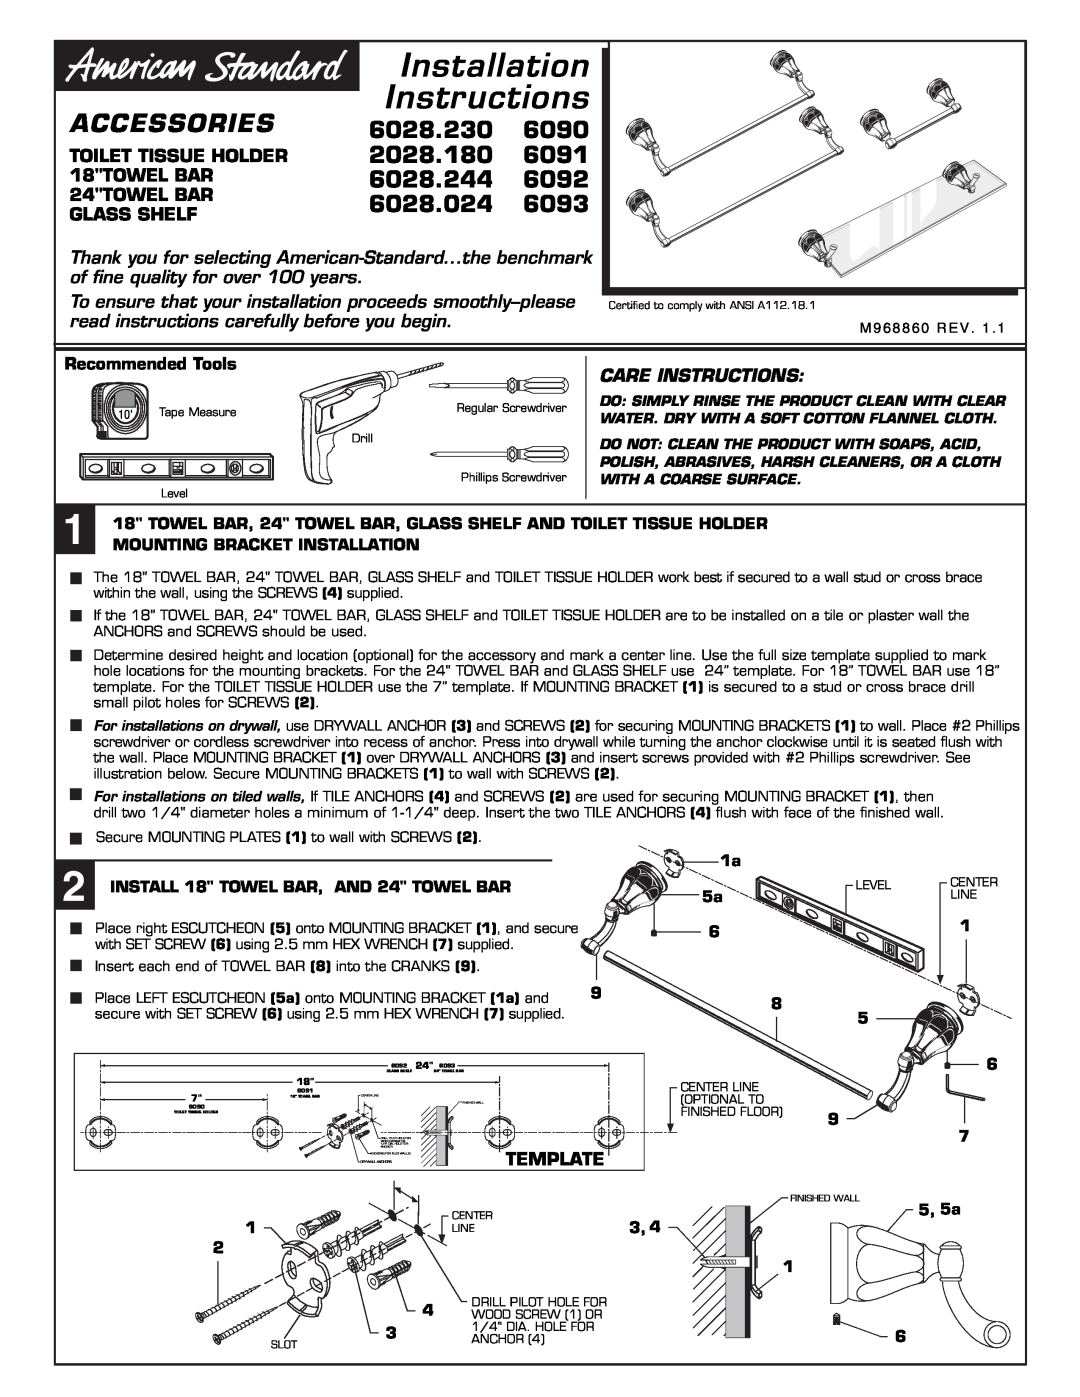 American Standard 2028.180 installation instructions Accessories, Recommended Tools, Template, Installation, Instructions 